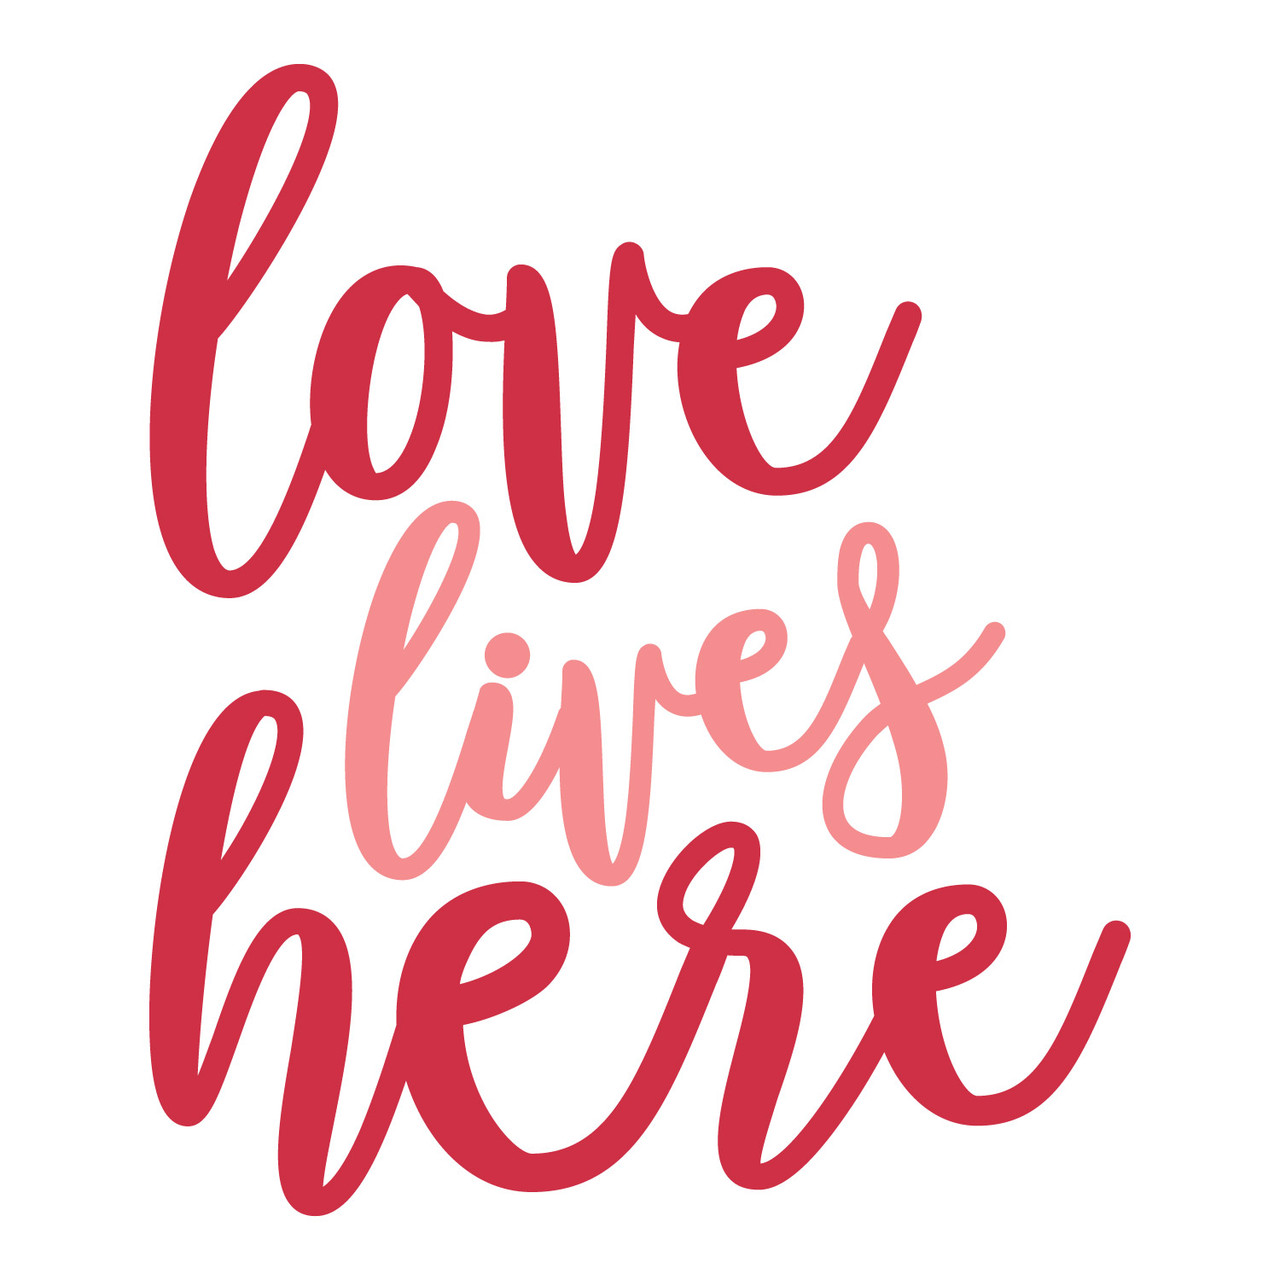 Download Love Lives Here Svg Svg Eps Png Dxf Cut Files For Cricut And Silhouette Cameo By Savanasdesign